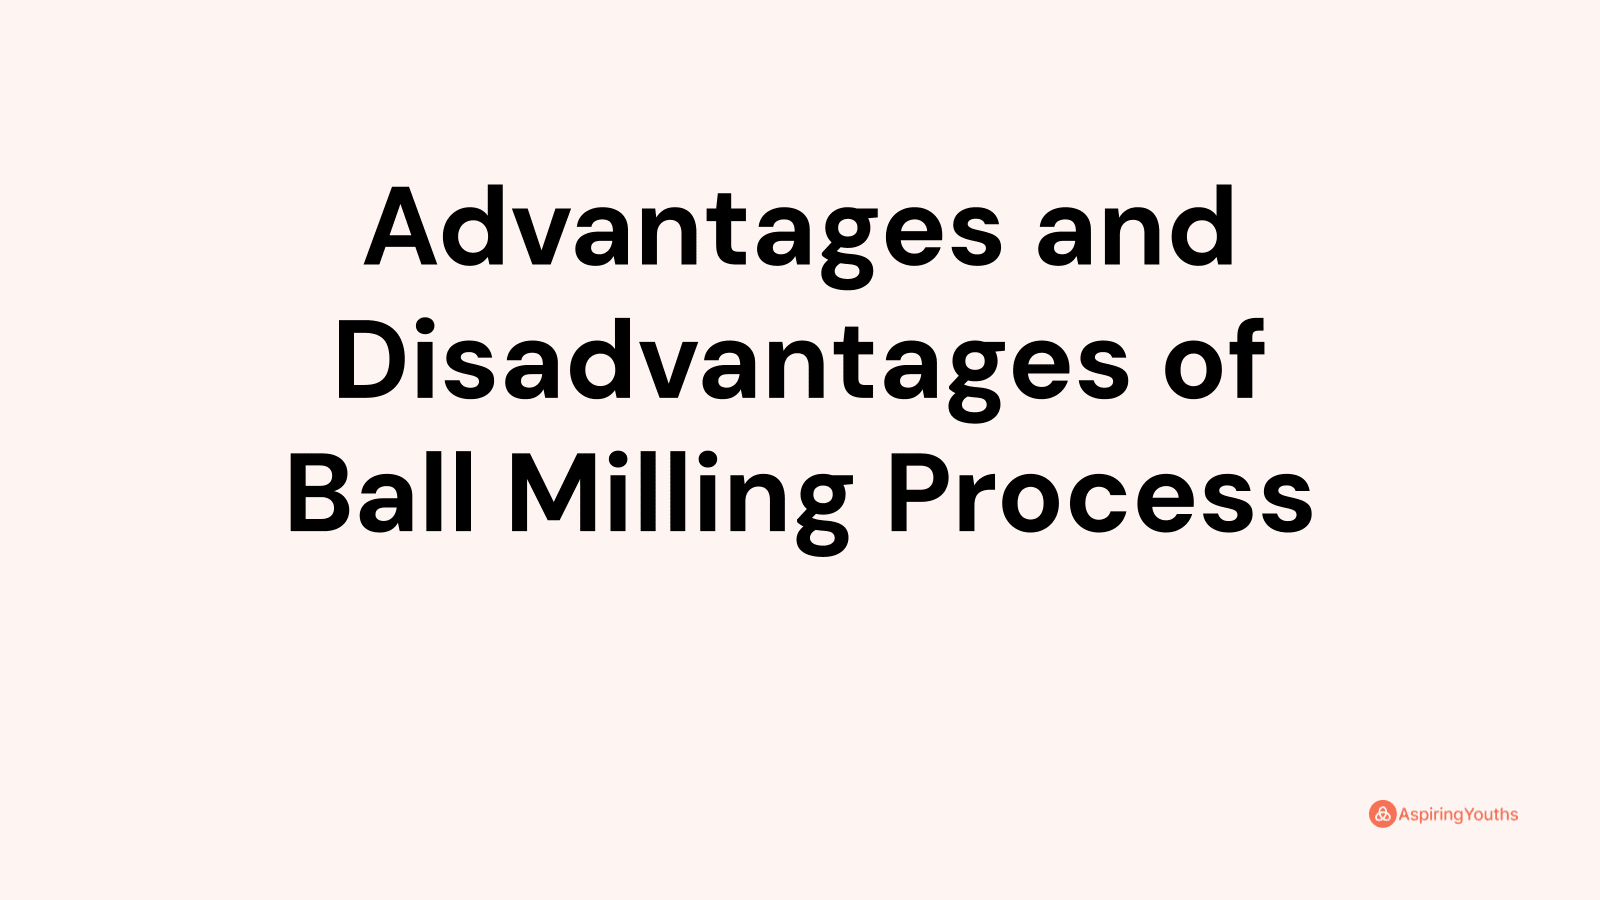 Advantages and disadvantages of Ball Milling Process